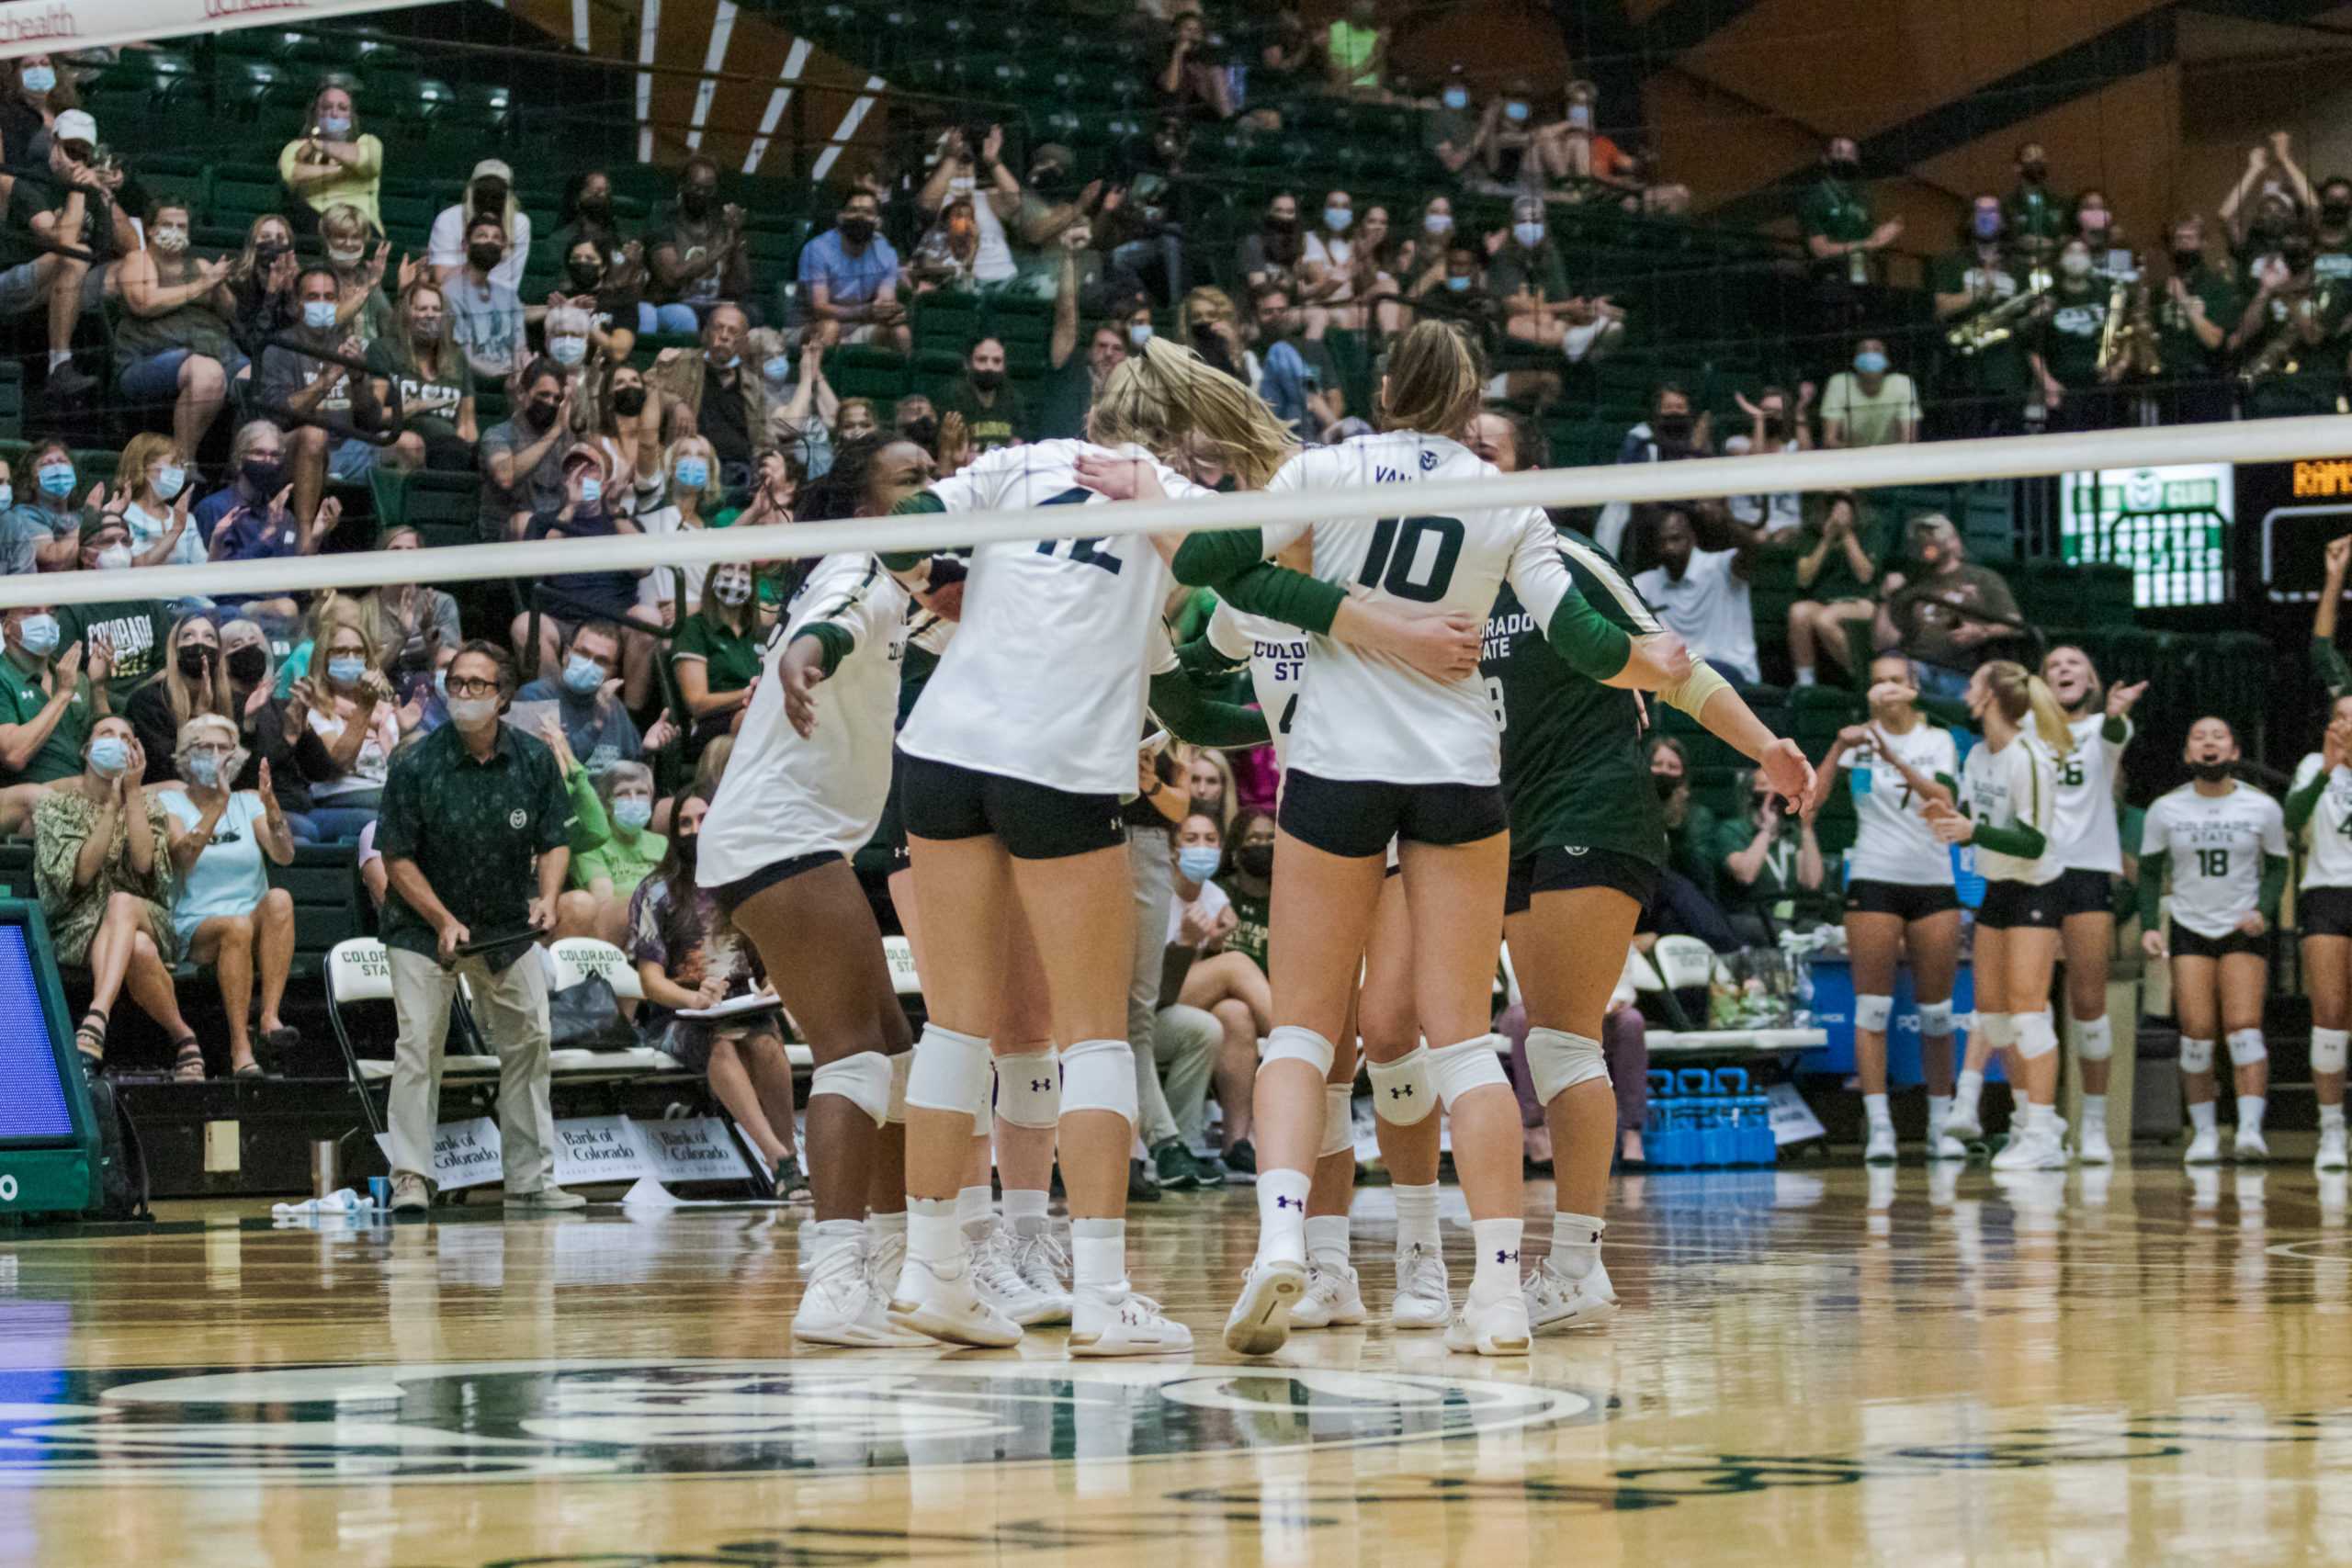 Volleyball players celebrate after scoring